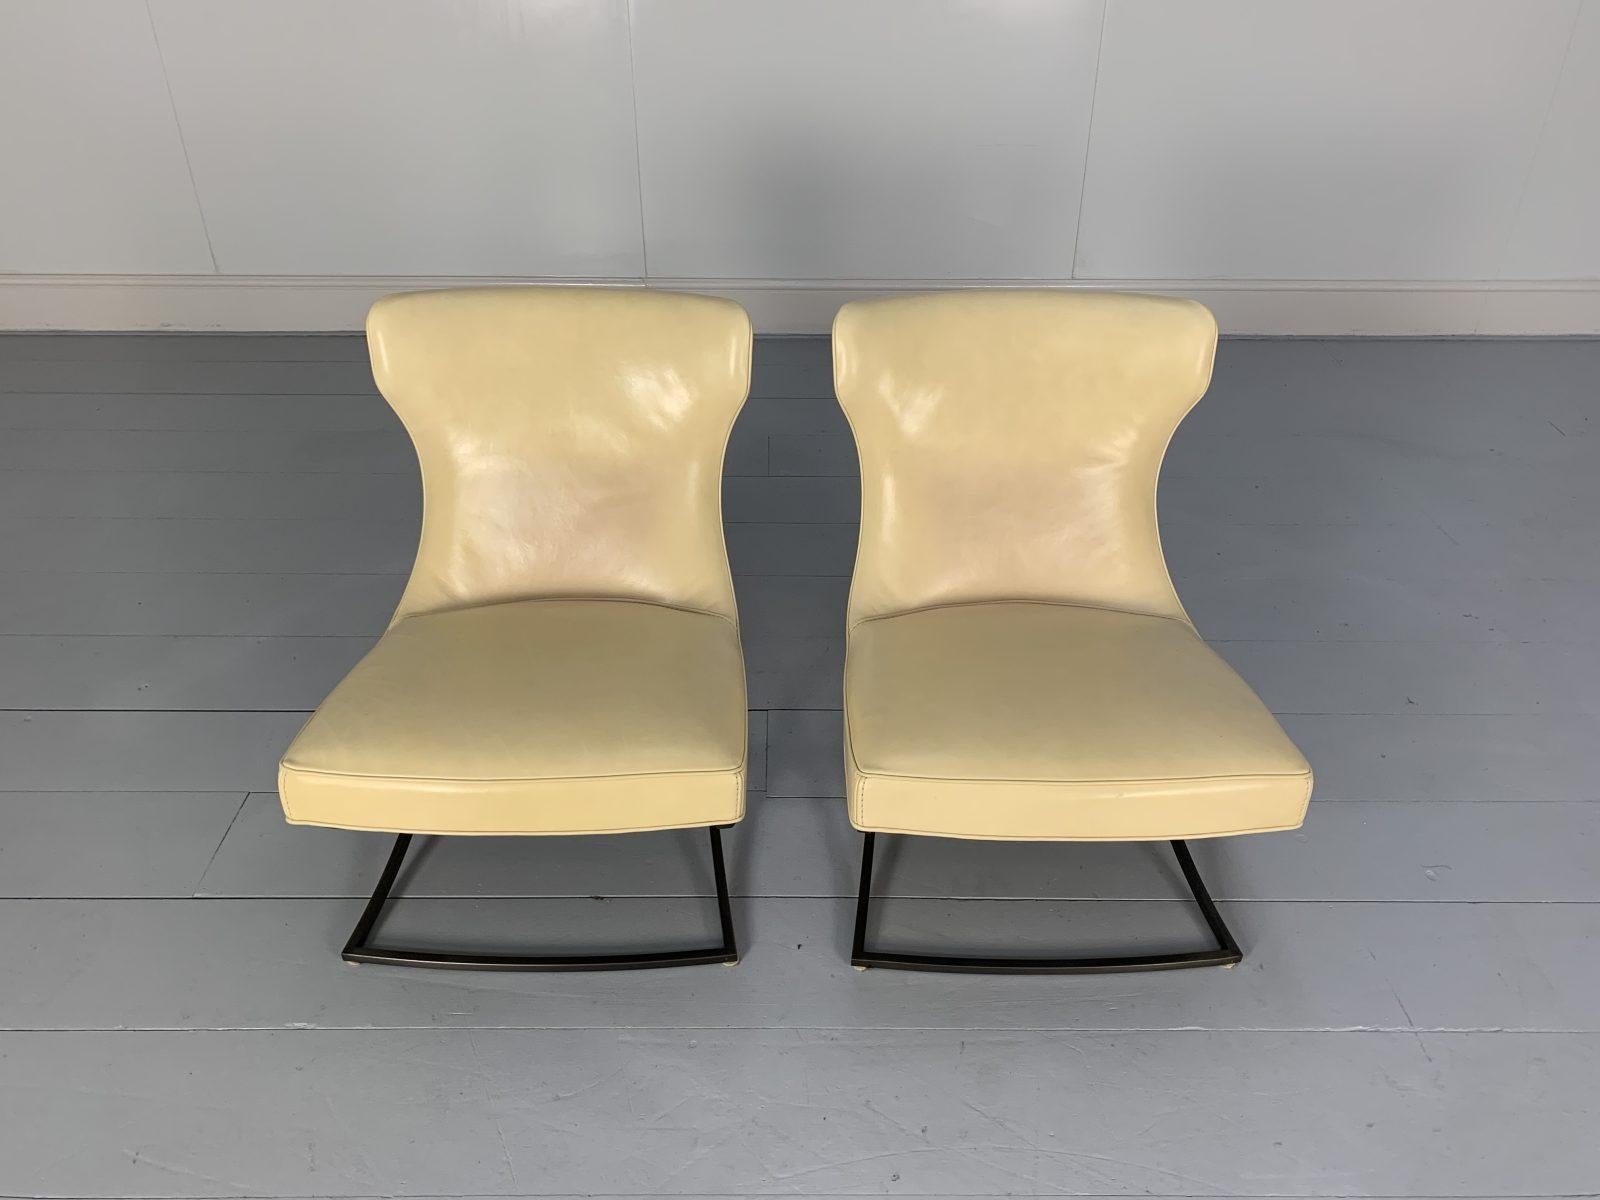 Contemporary Pair of Baxter “Paloma” Chairs, in Cream Leather For Sale